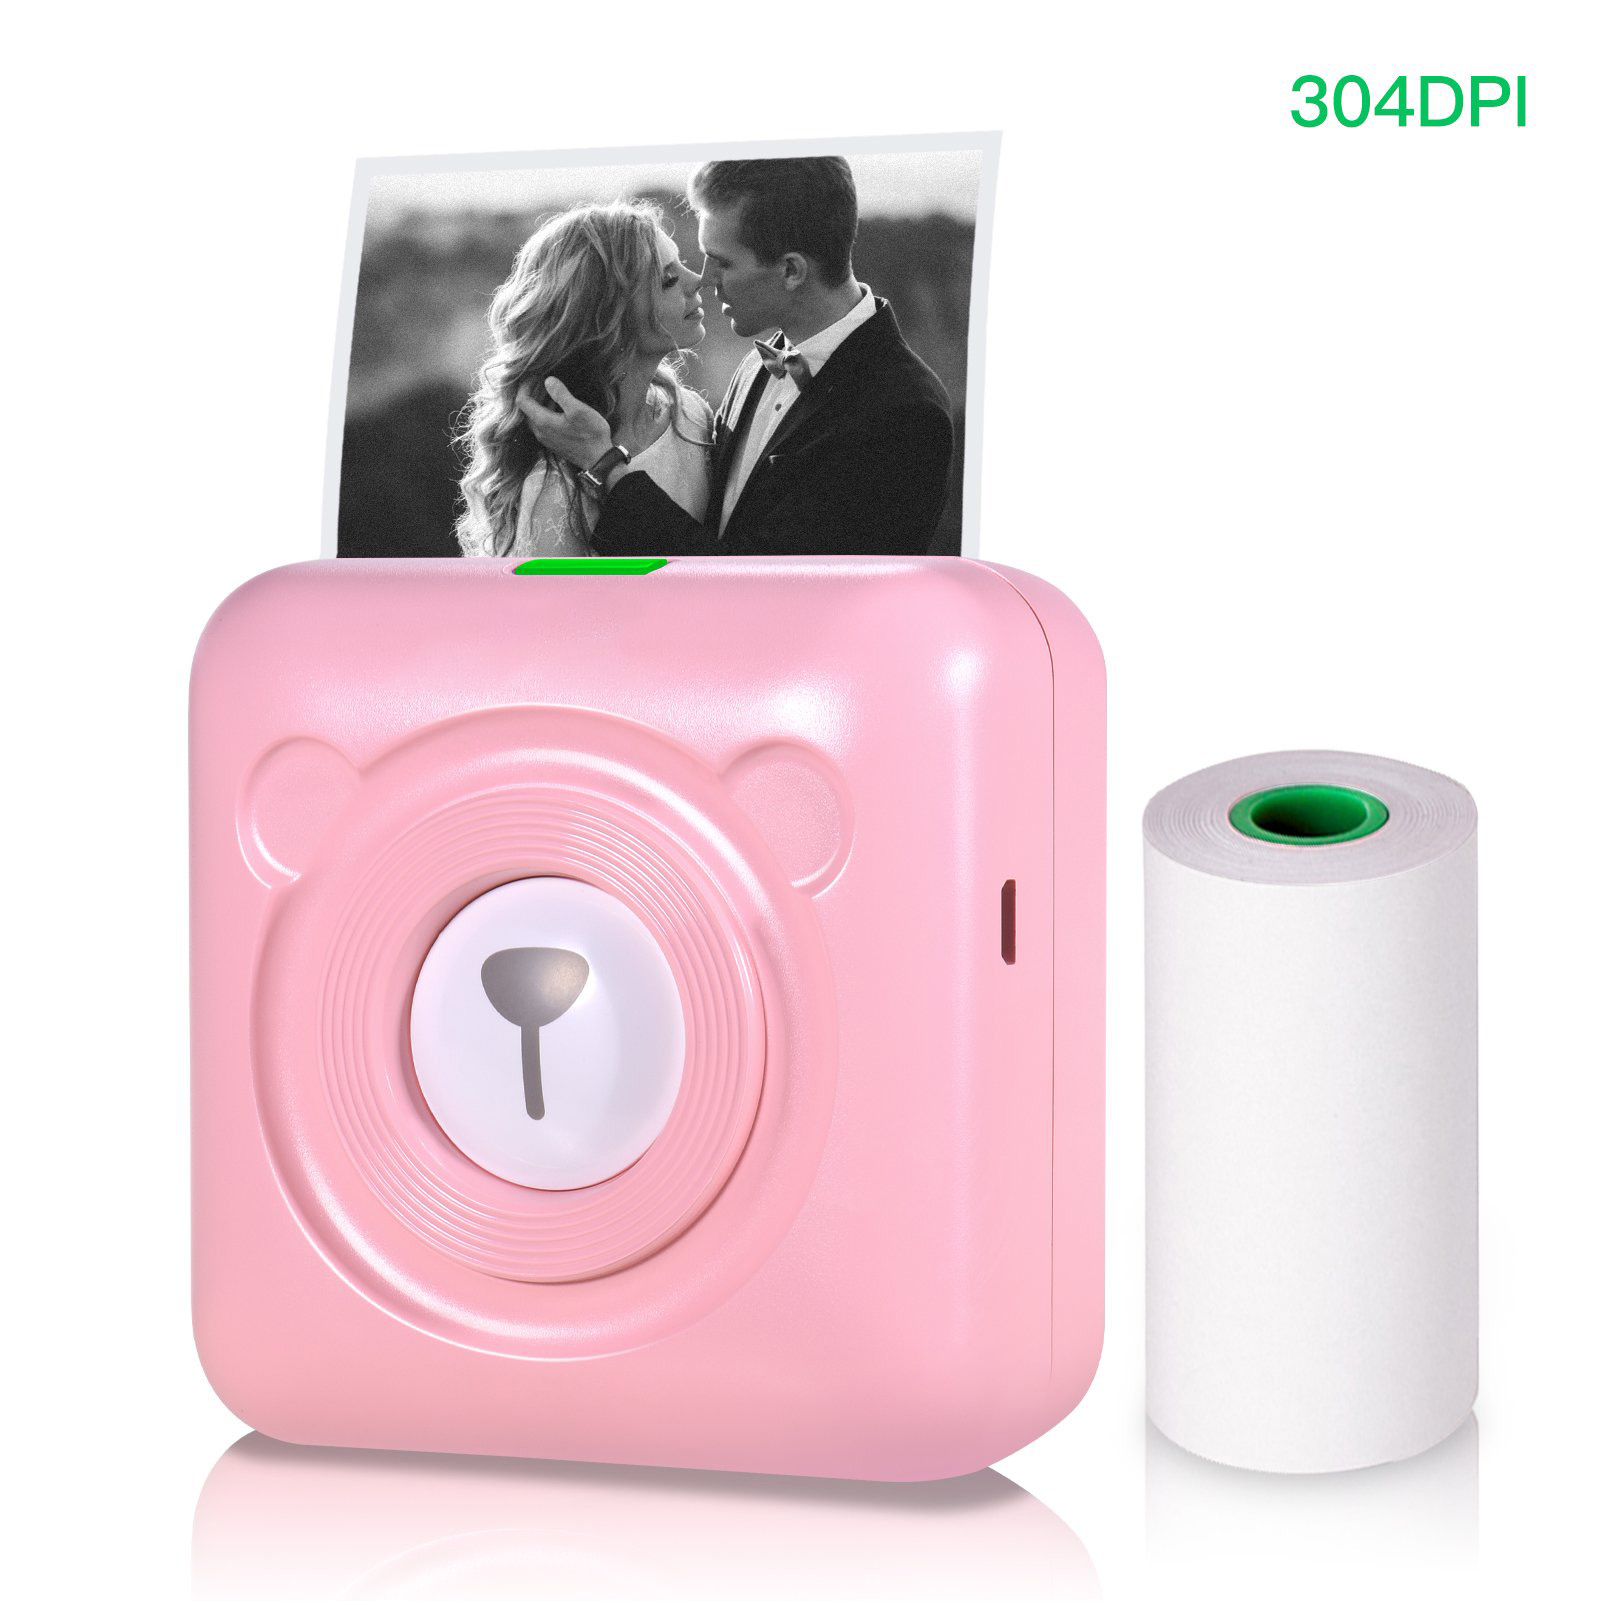 Mini Printer 304DPI Wireless BT Thermal Printer Picture Photo Label Memo Notes Journal Receipt Paper Instant Printer Sticker AR Photo Function Inkless Printing